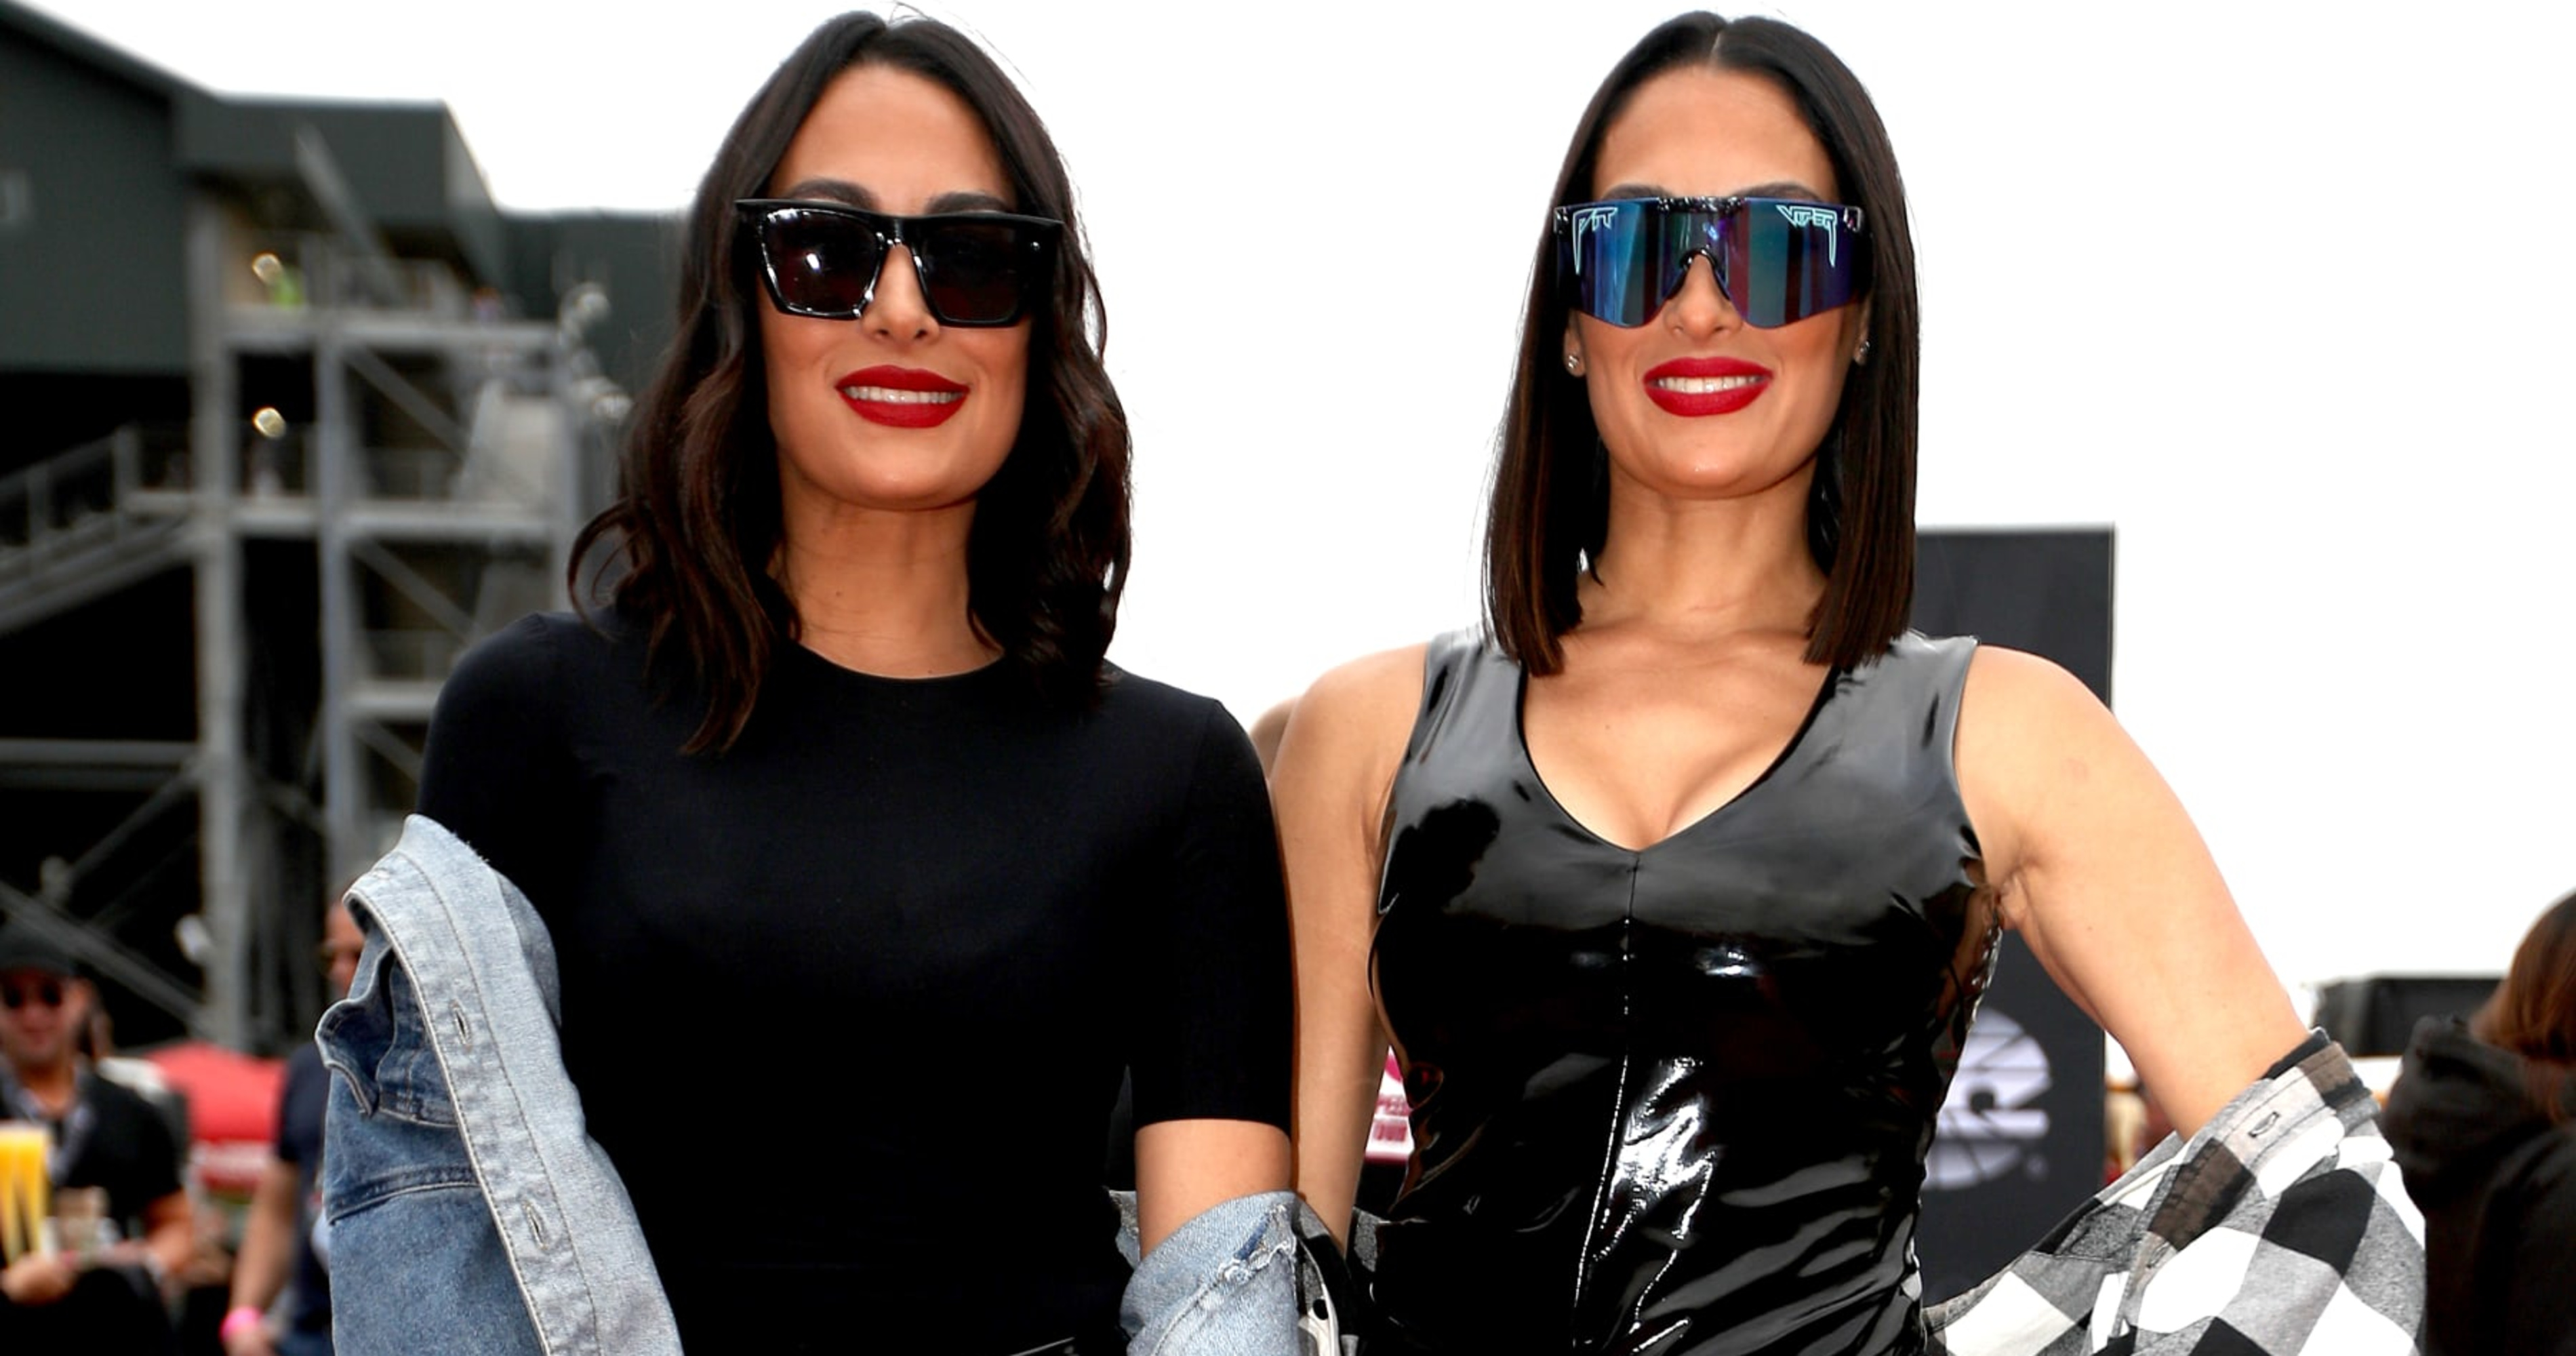 Bella Twins Are Leaving WWE, Will Use Their Real Last Name